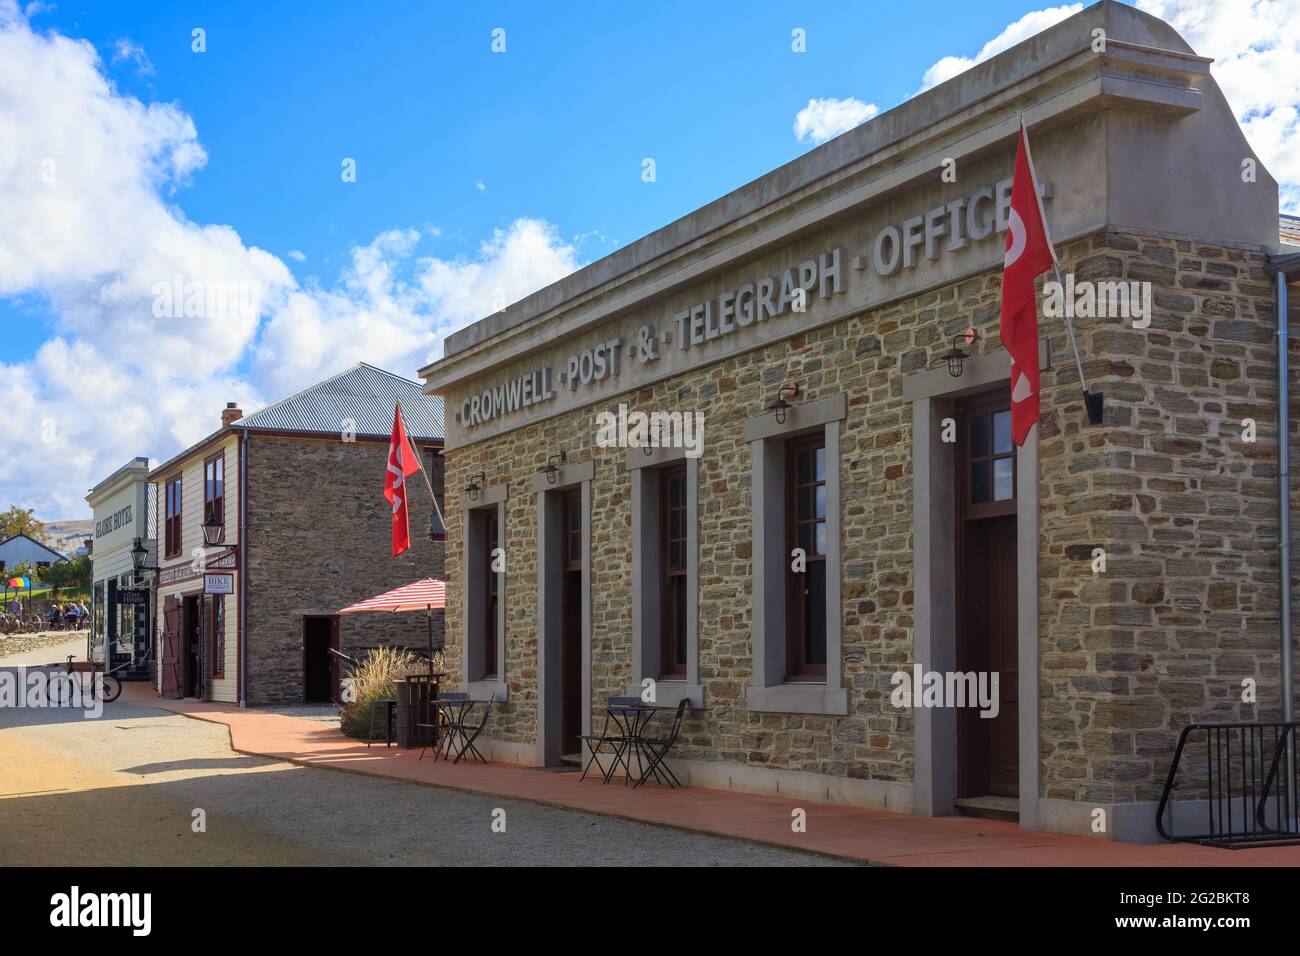 The Post & Telegraph Office in the Cromwell Heritage Precinct, a collection of historic buildings in the town of Cromwell, New Zealand Stock Photo